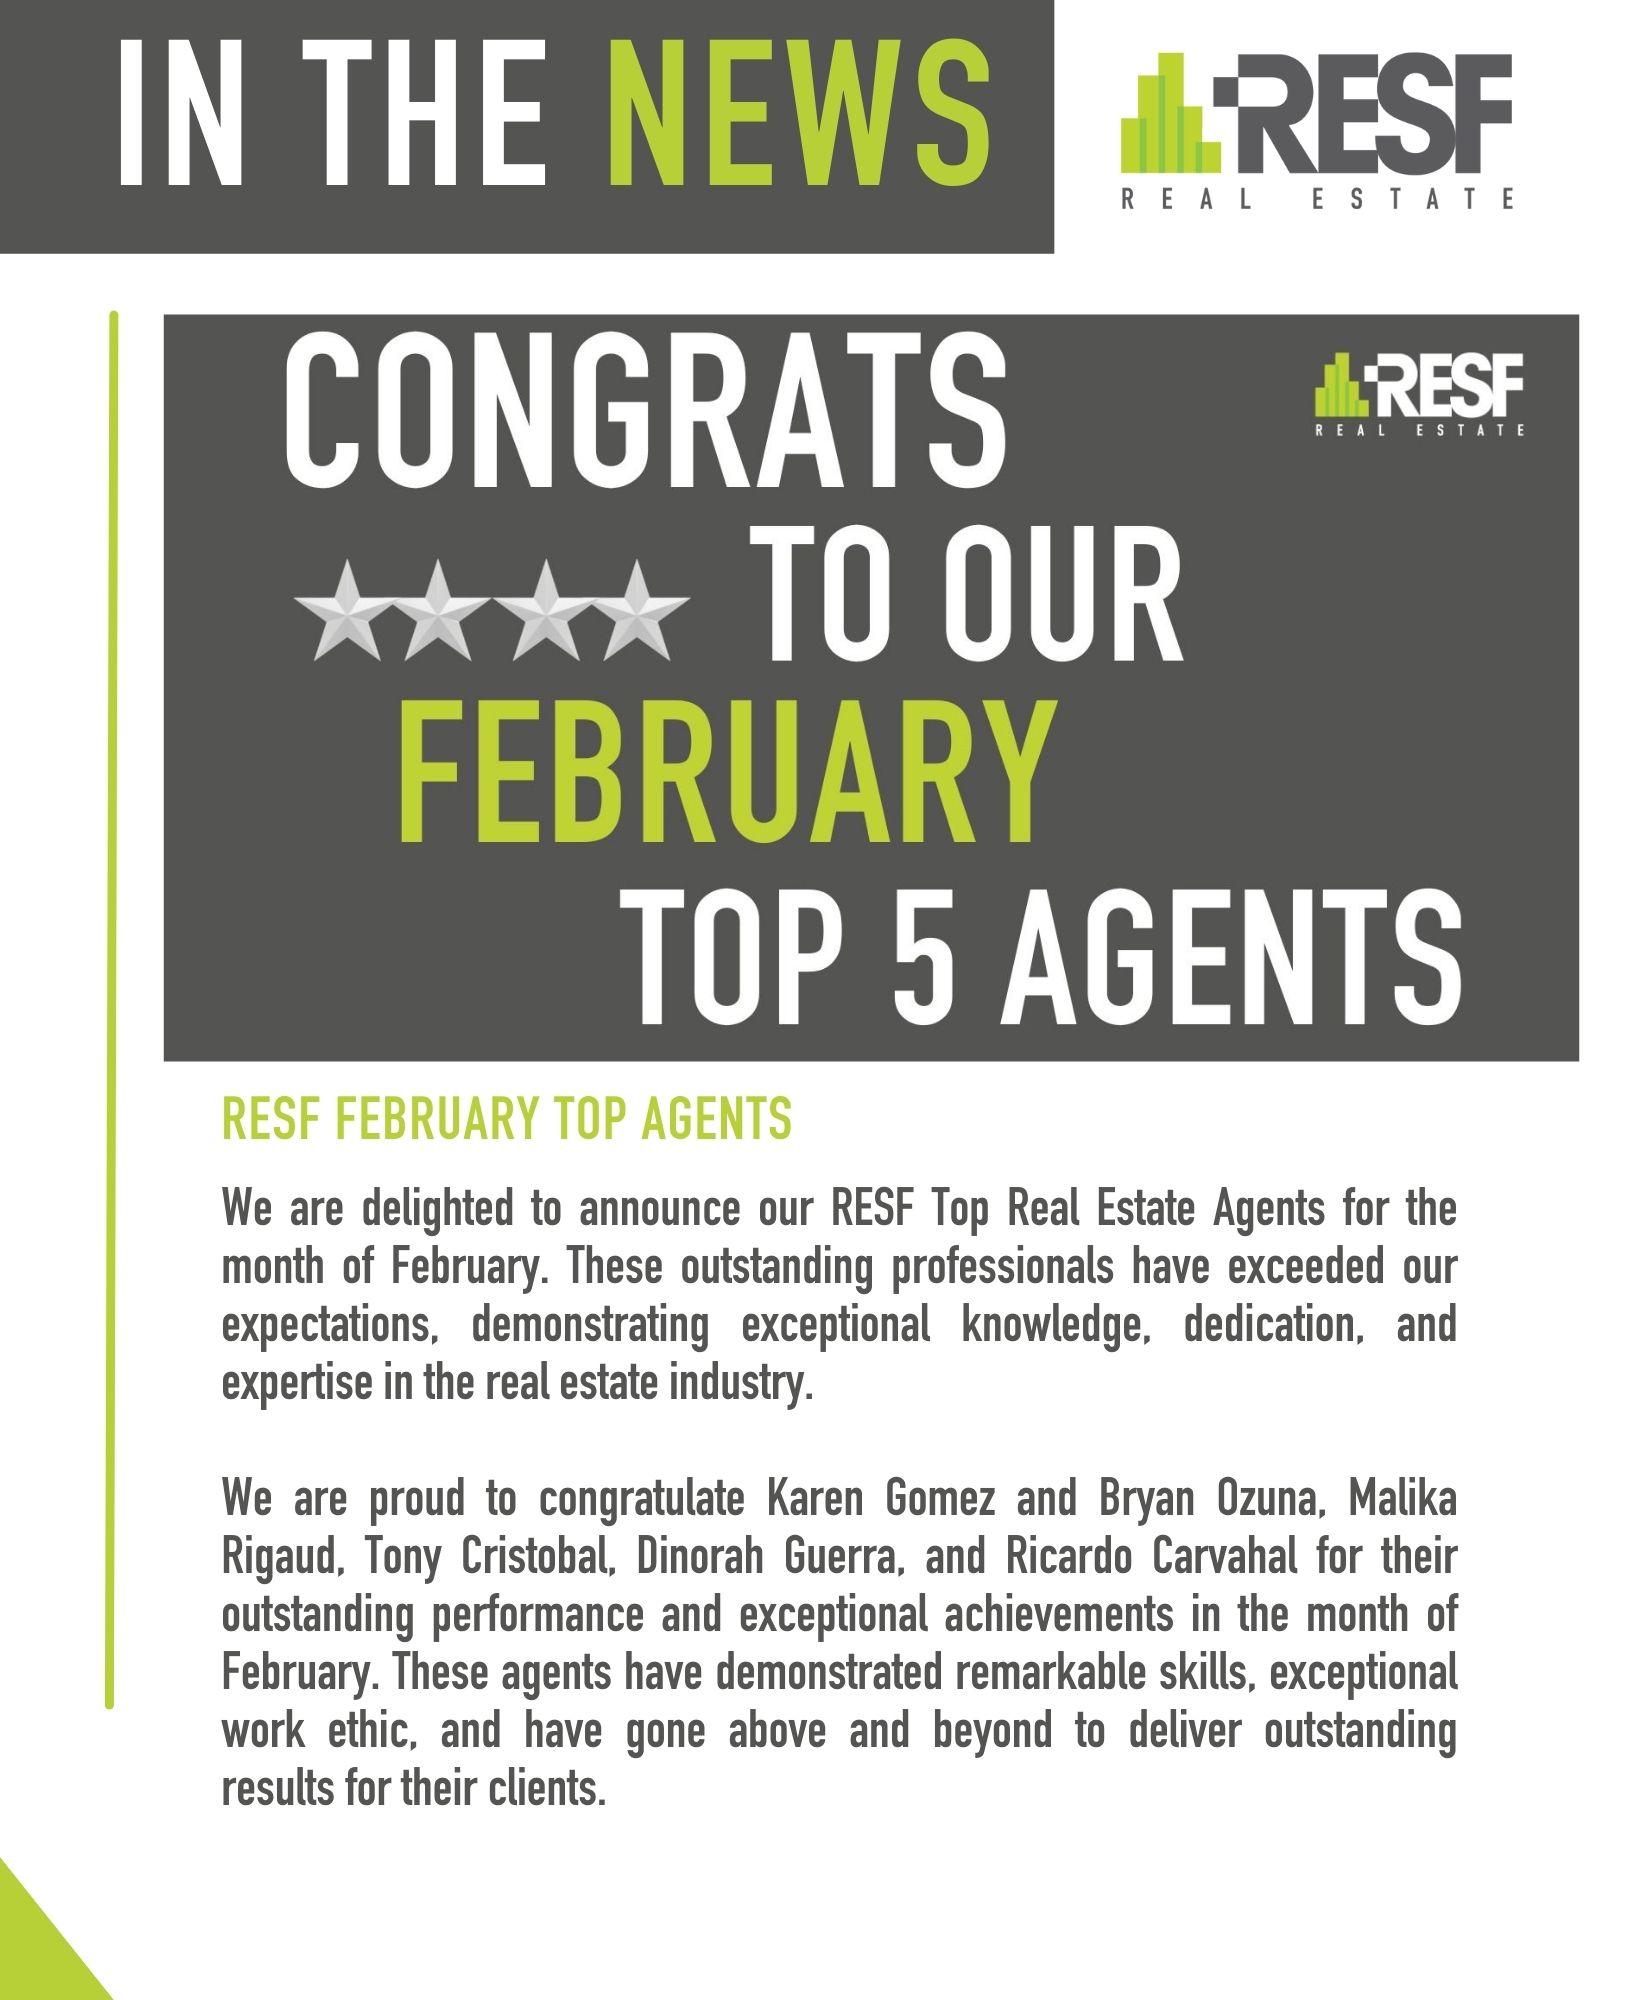 RESF FEBRUARY TOP AGENTS